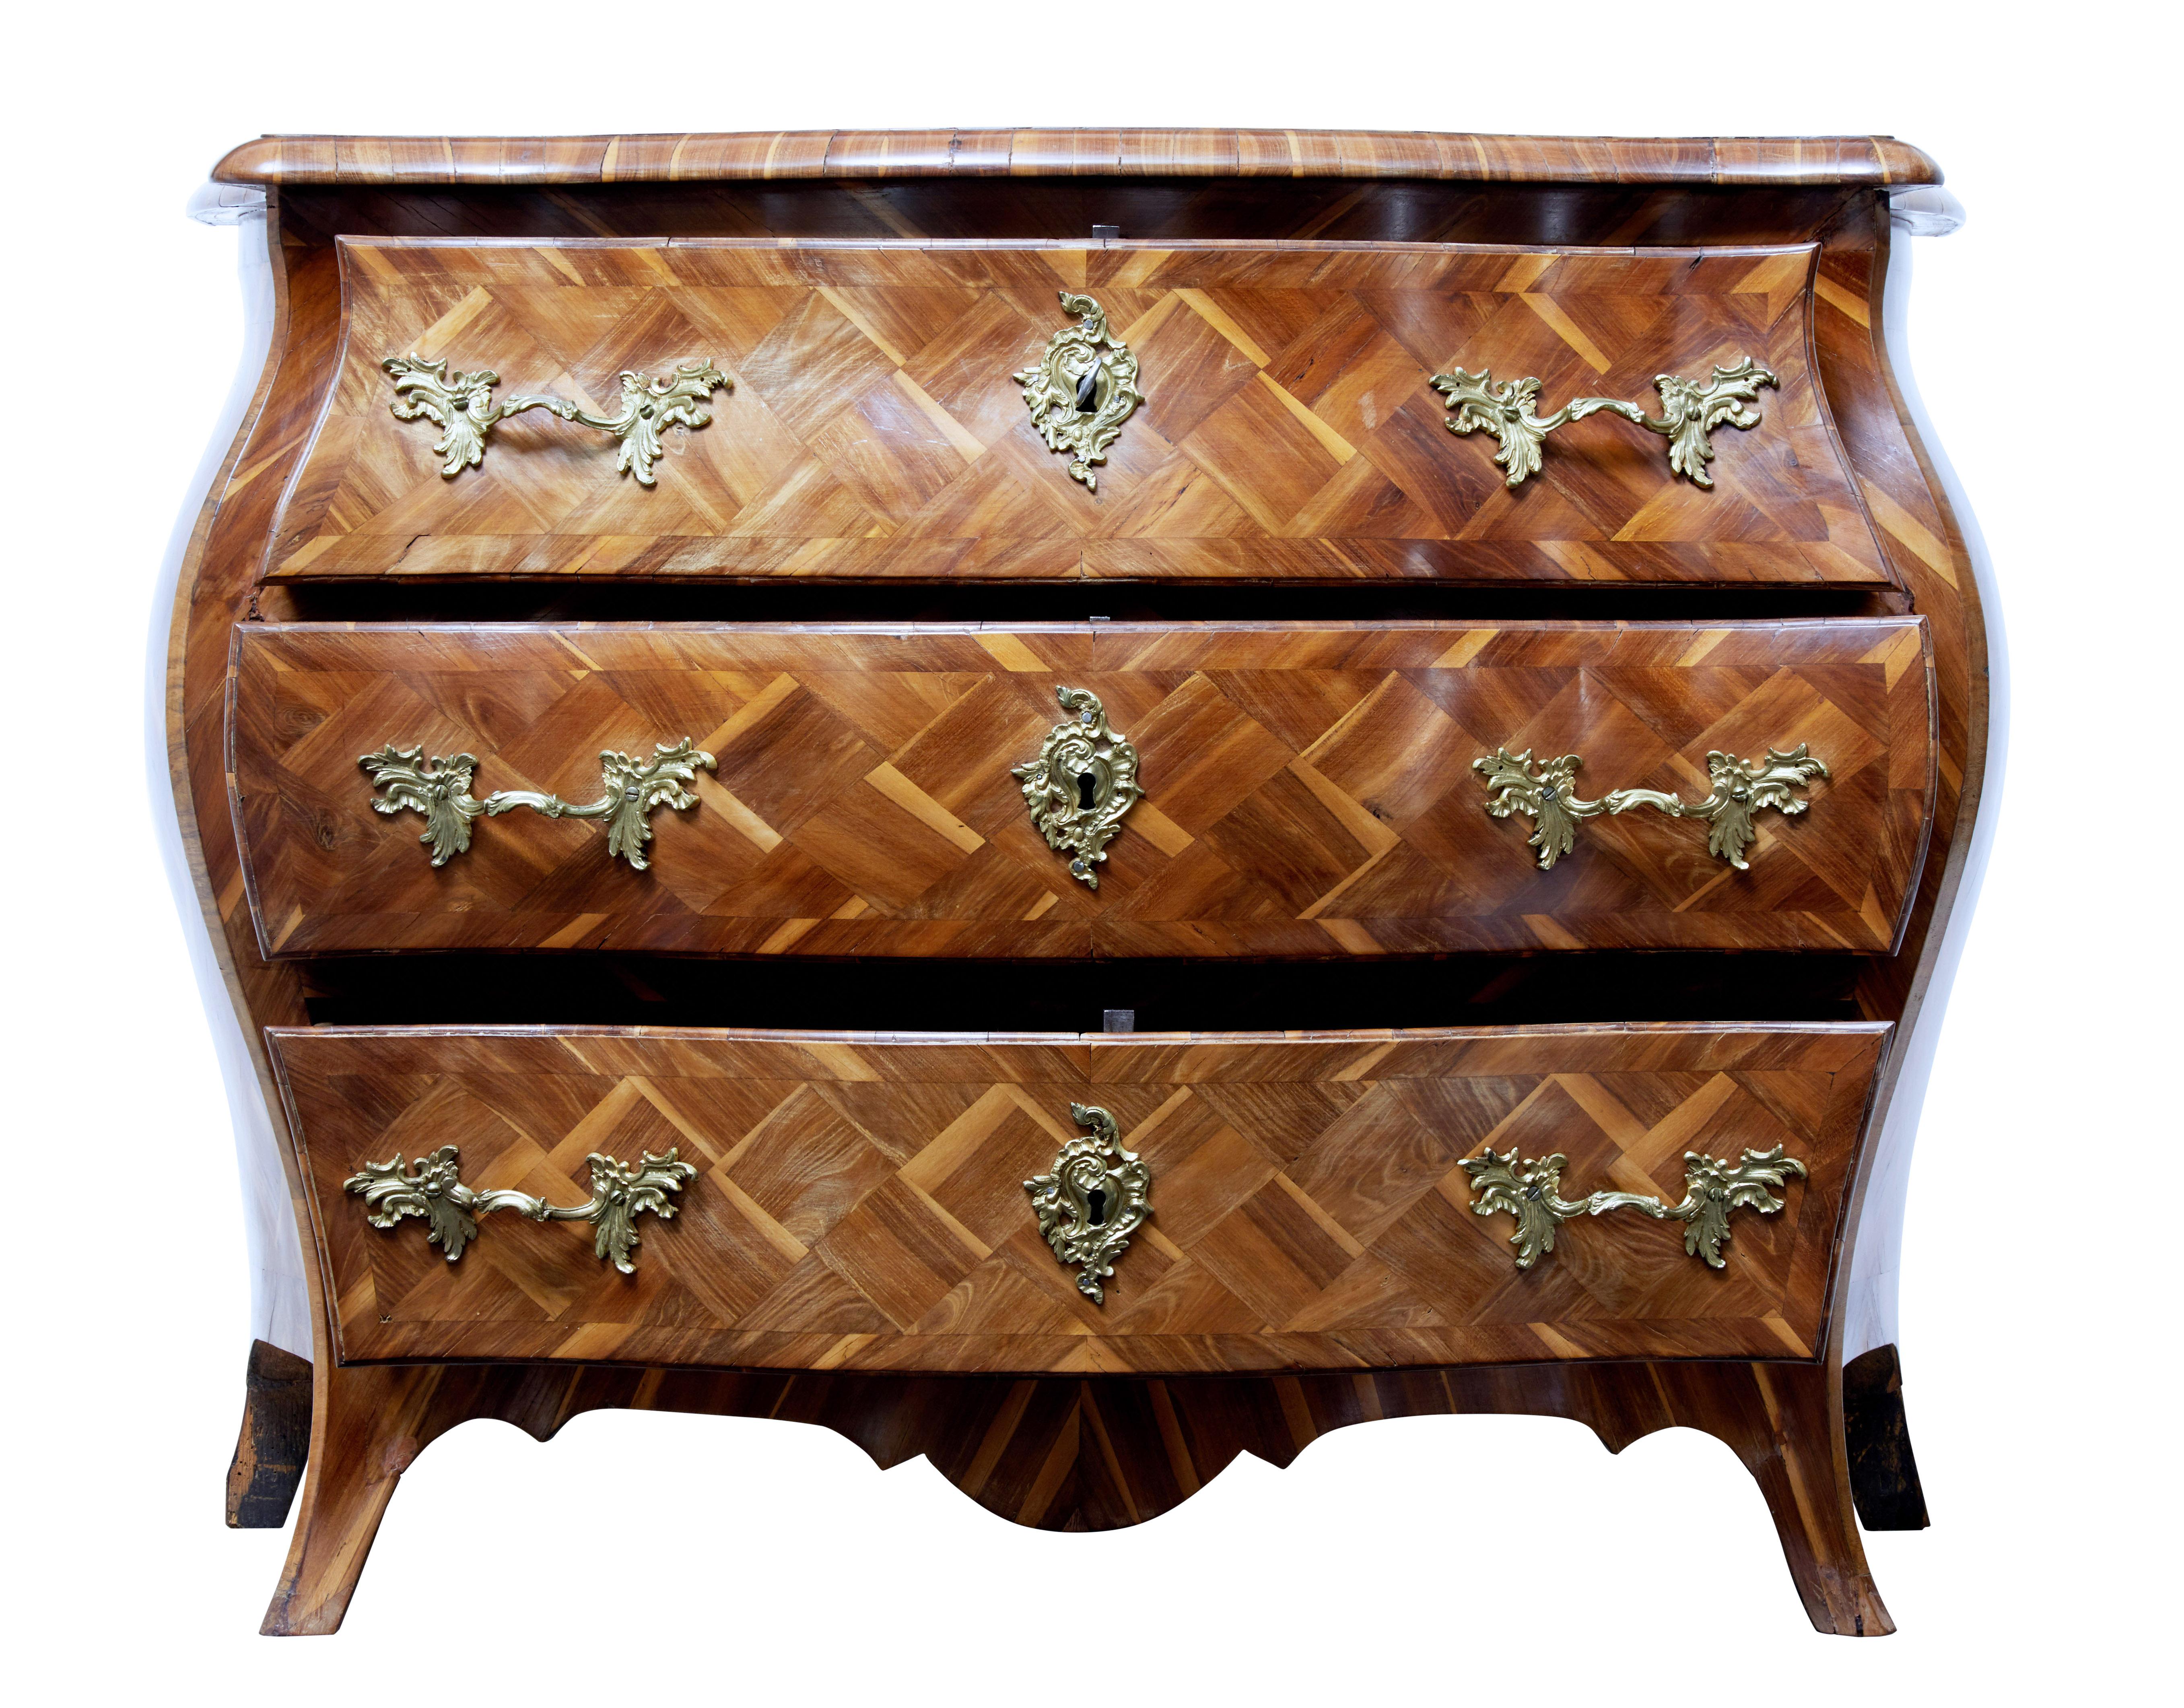 We are pleased to offer one of the finest commodes we have dealt in. Rococo period and made in plum wood, circa 1730.

Parquet has been finely arranged in angled squares and crossbanded in the same plum wood.

Elegant bombe shape, 3 drawers with